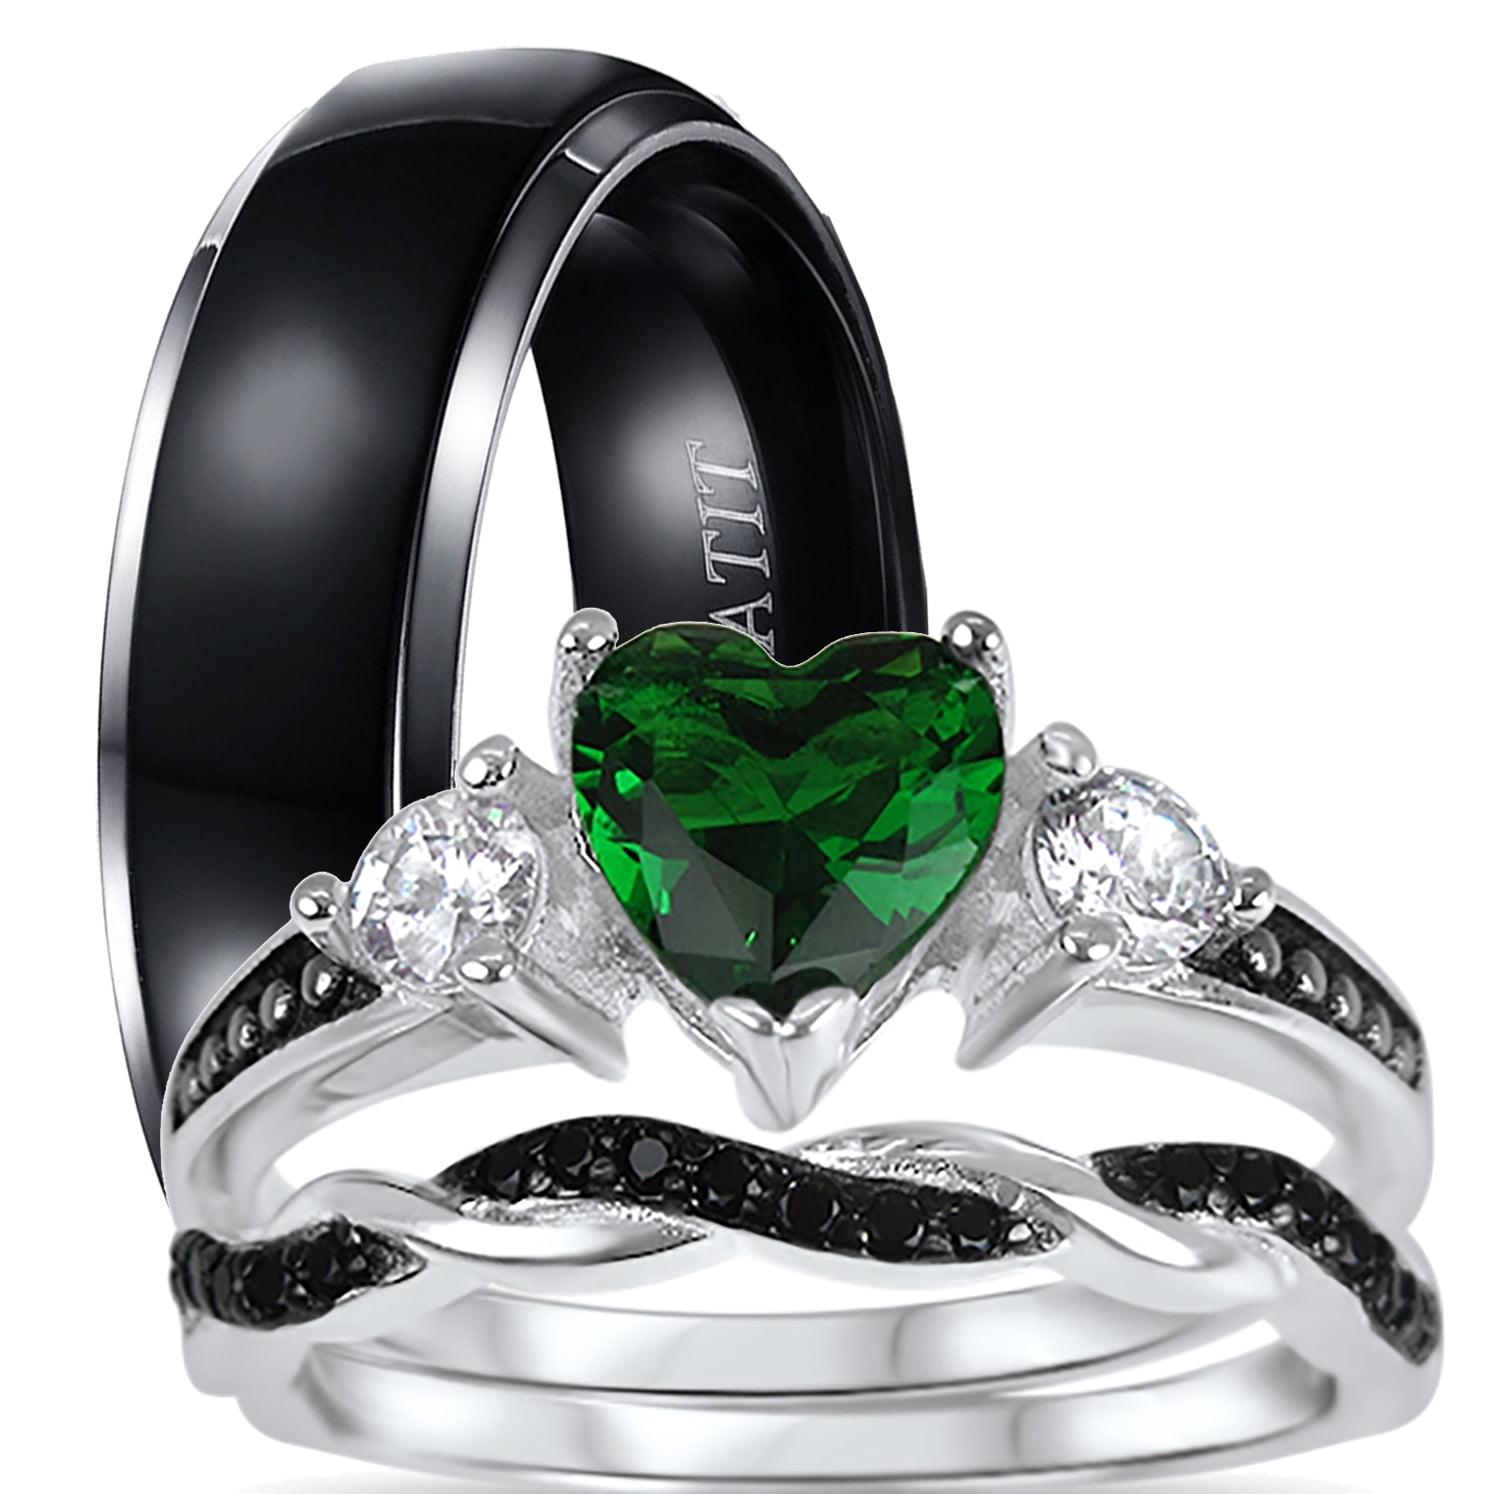 You are getting married - should your wedding rings complement one ano –  Spexton